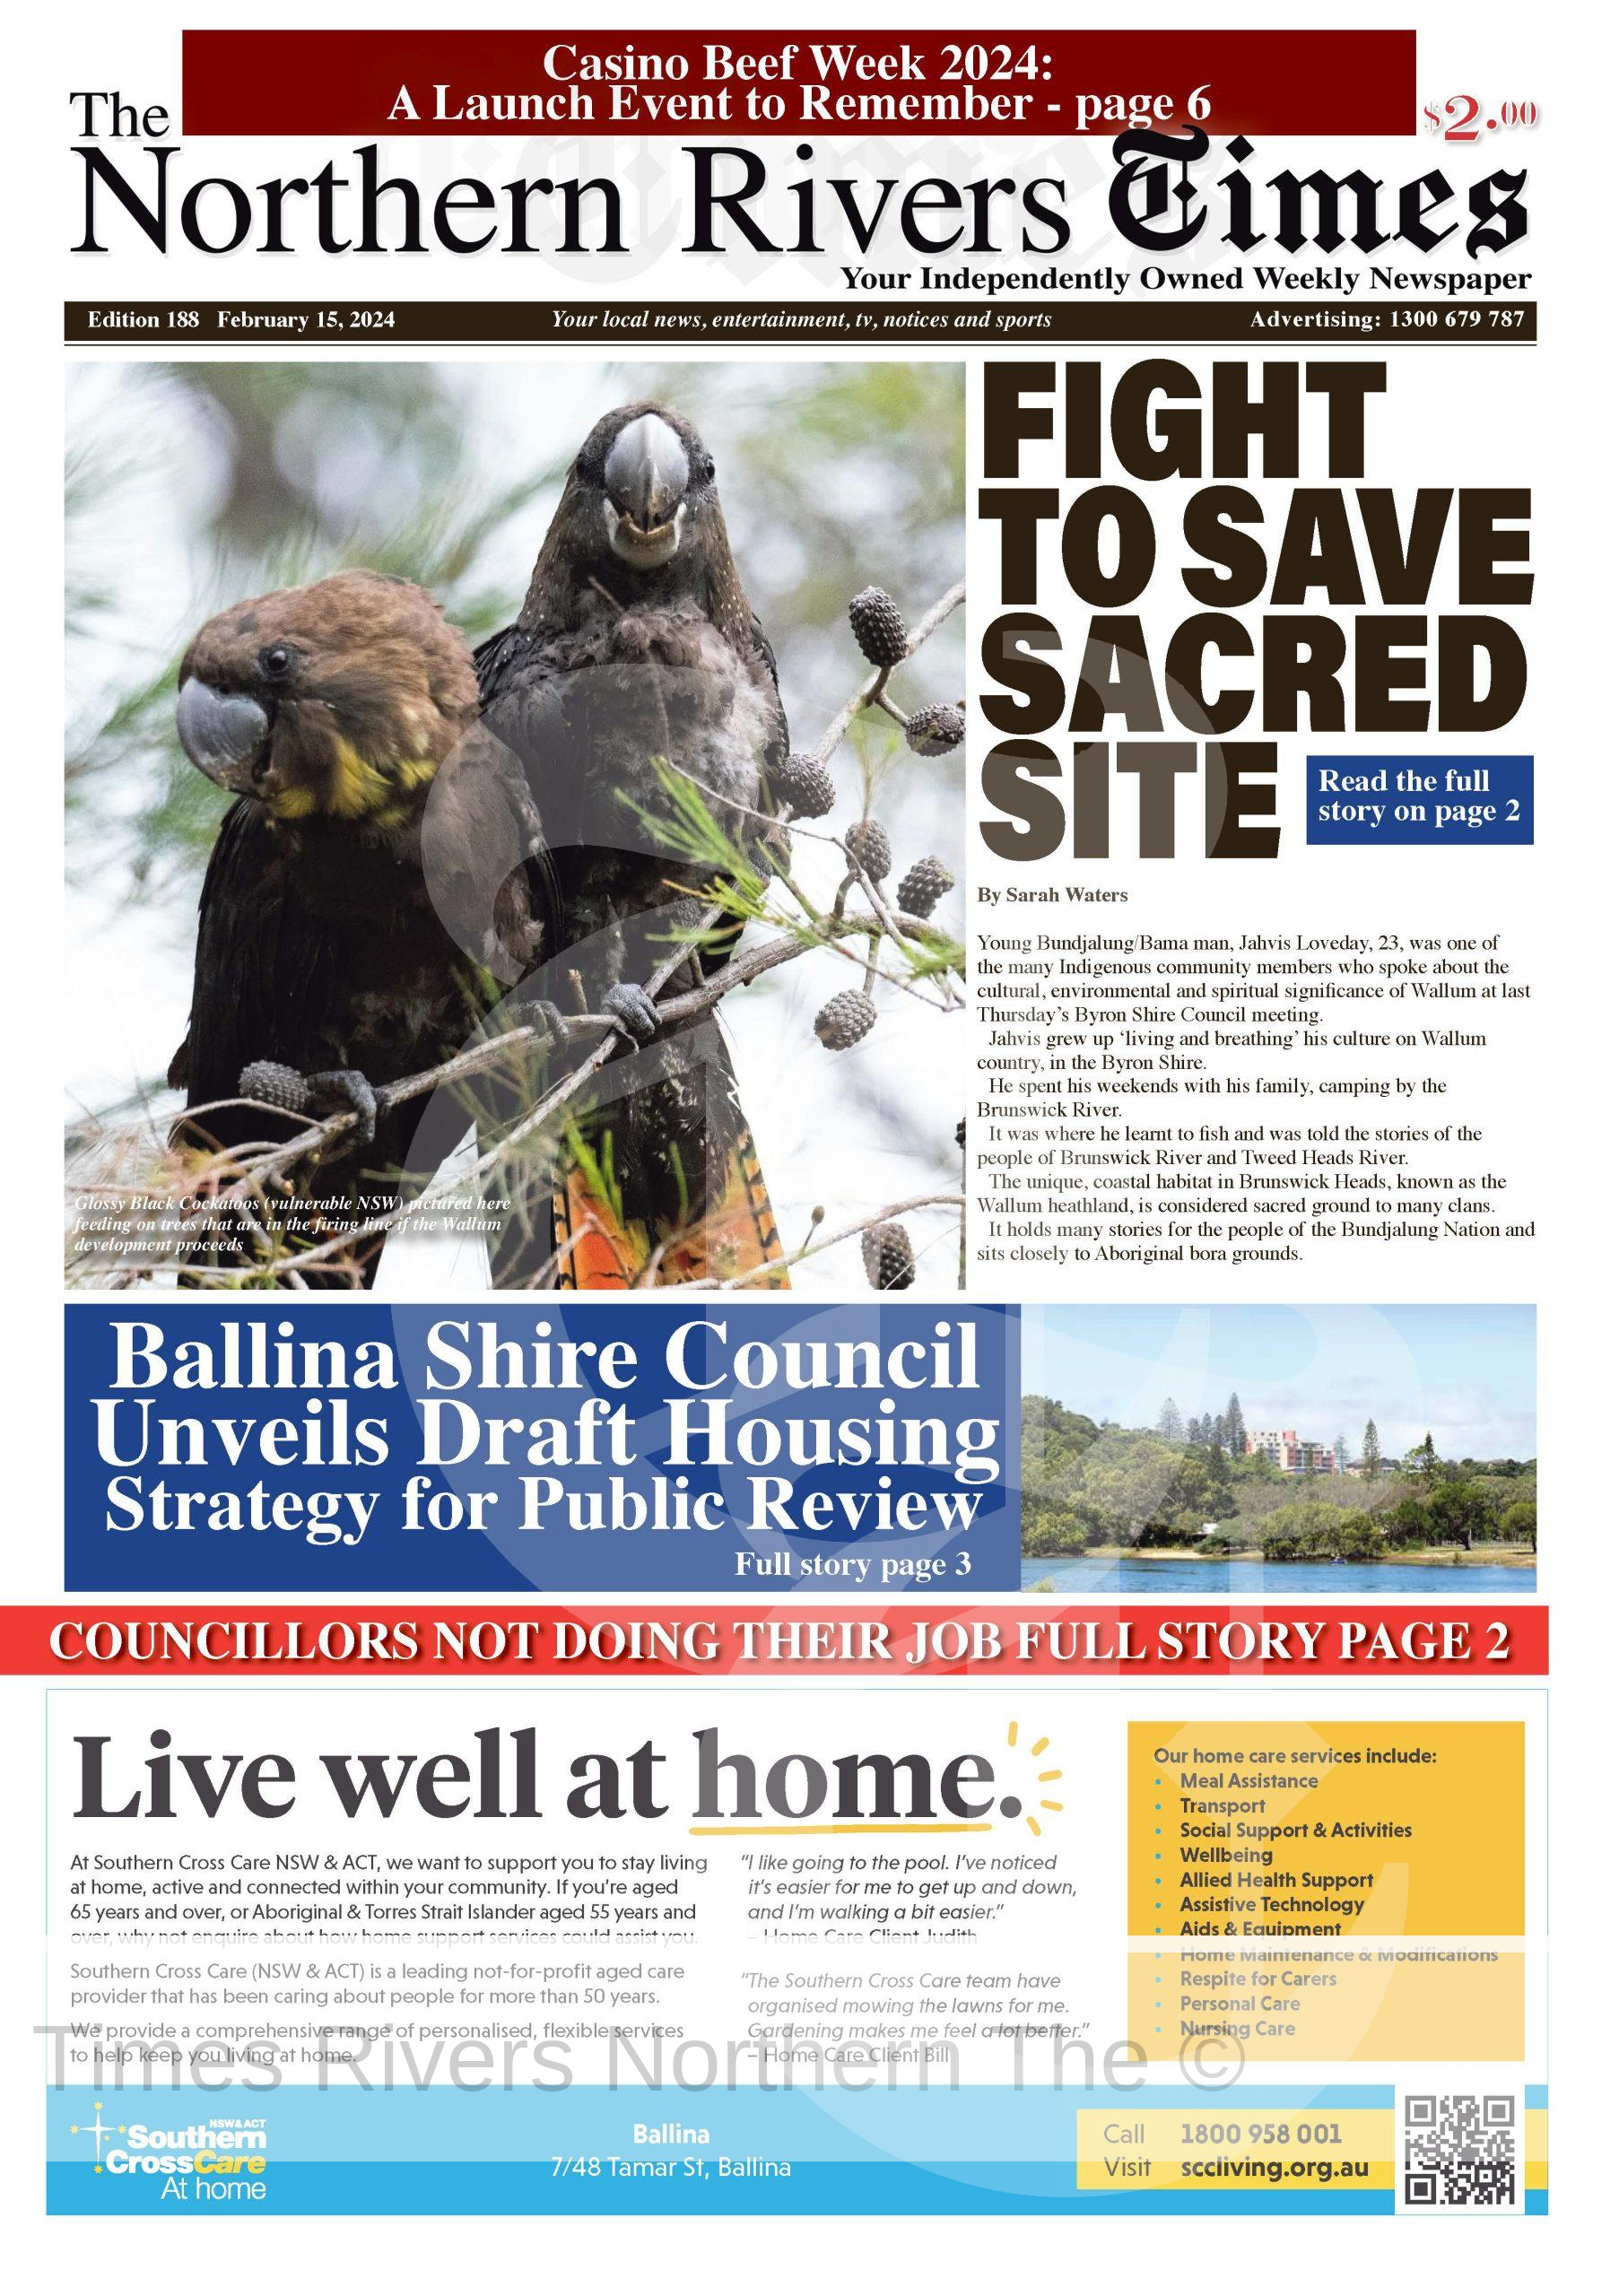 The Northern Rivers Times Edition 188